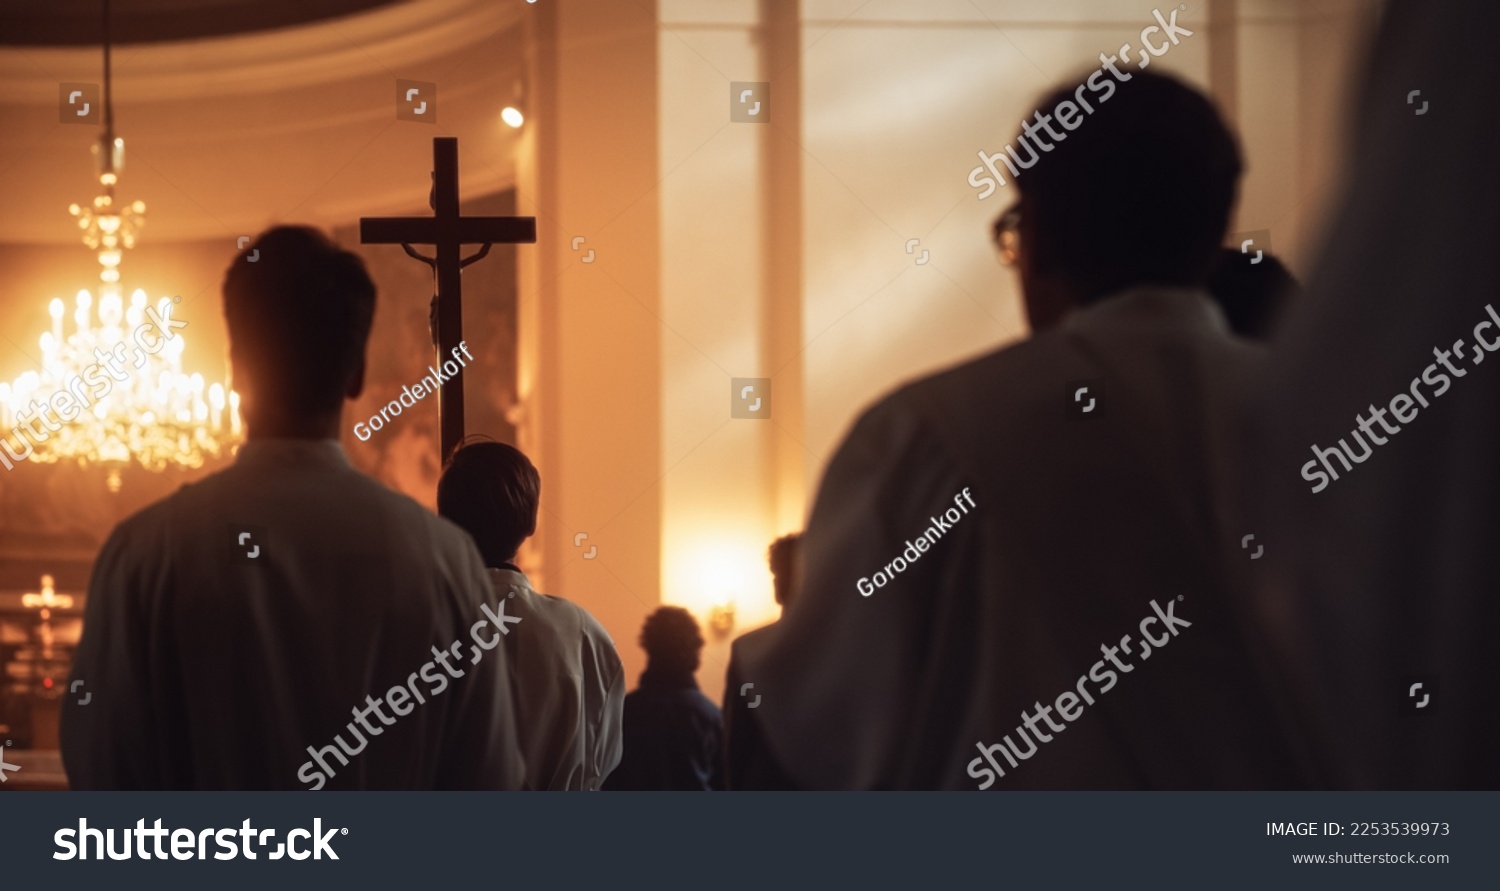 Liturgy In Church: Procession Of Ministers, Bearing Holy Cross to Altar, As Congregation Stands In Wonder. Christians Rejoice In Celebration Of Divine Mass. Hymns Praise God #2253539973